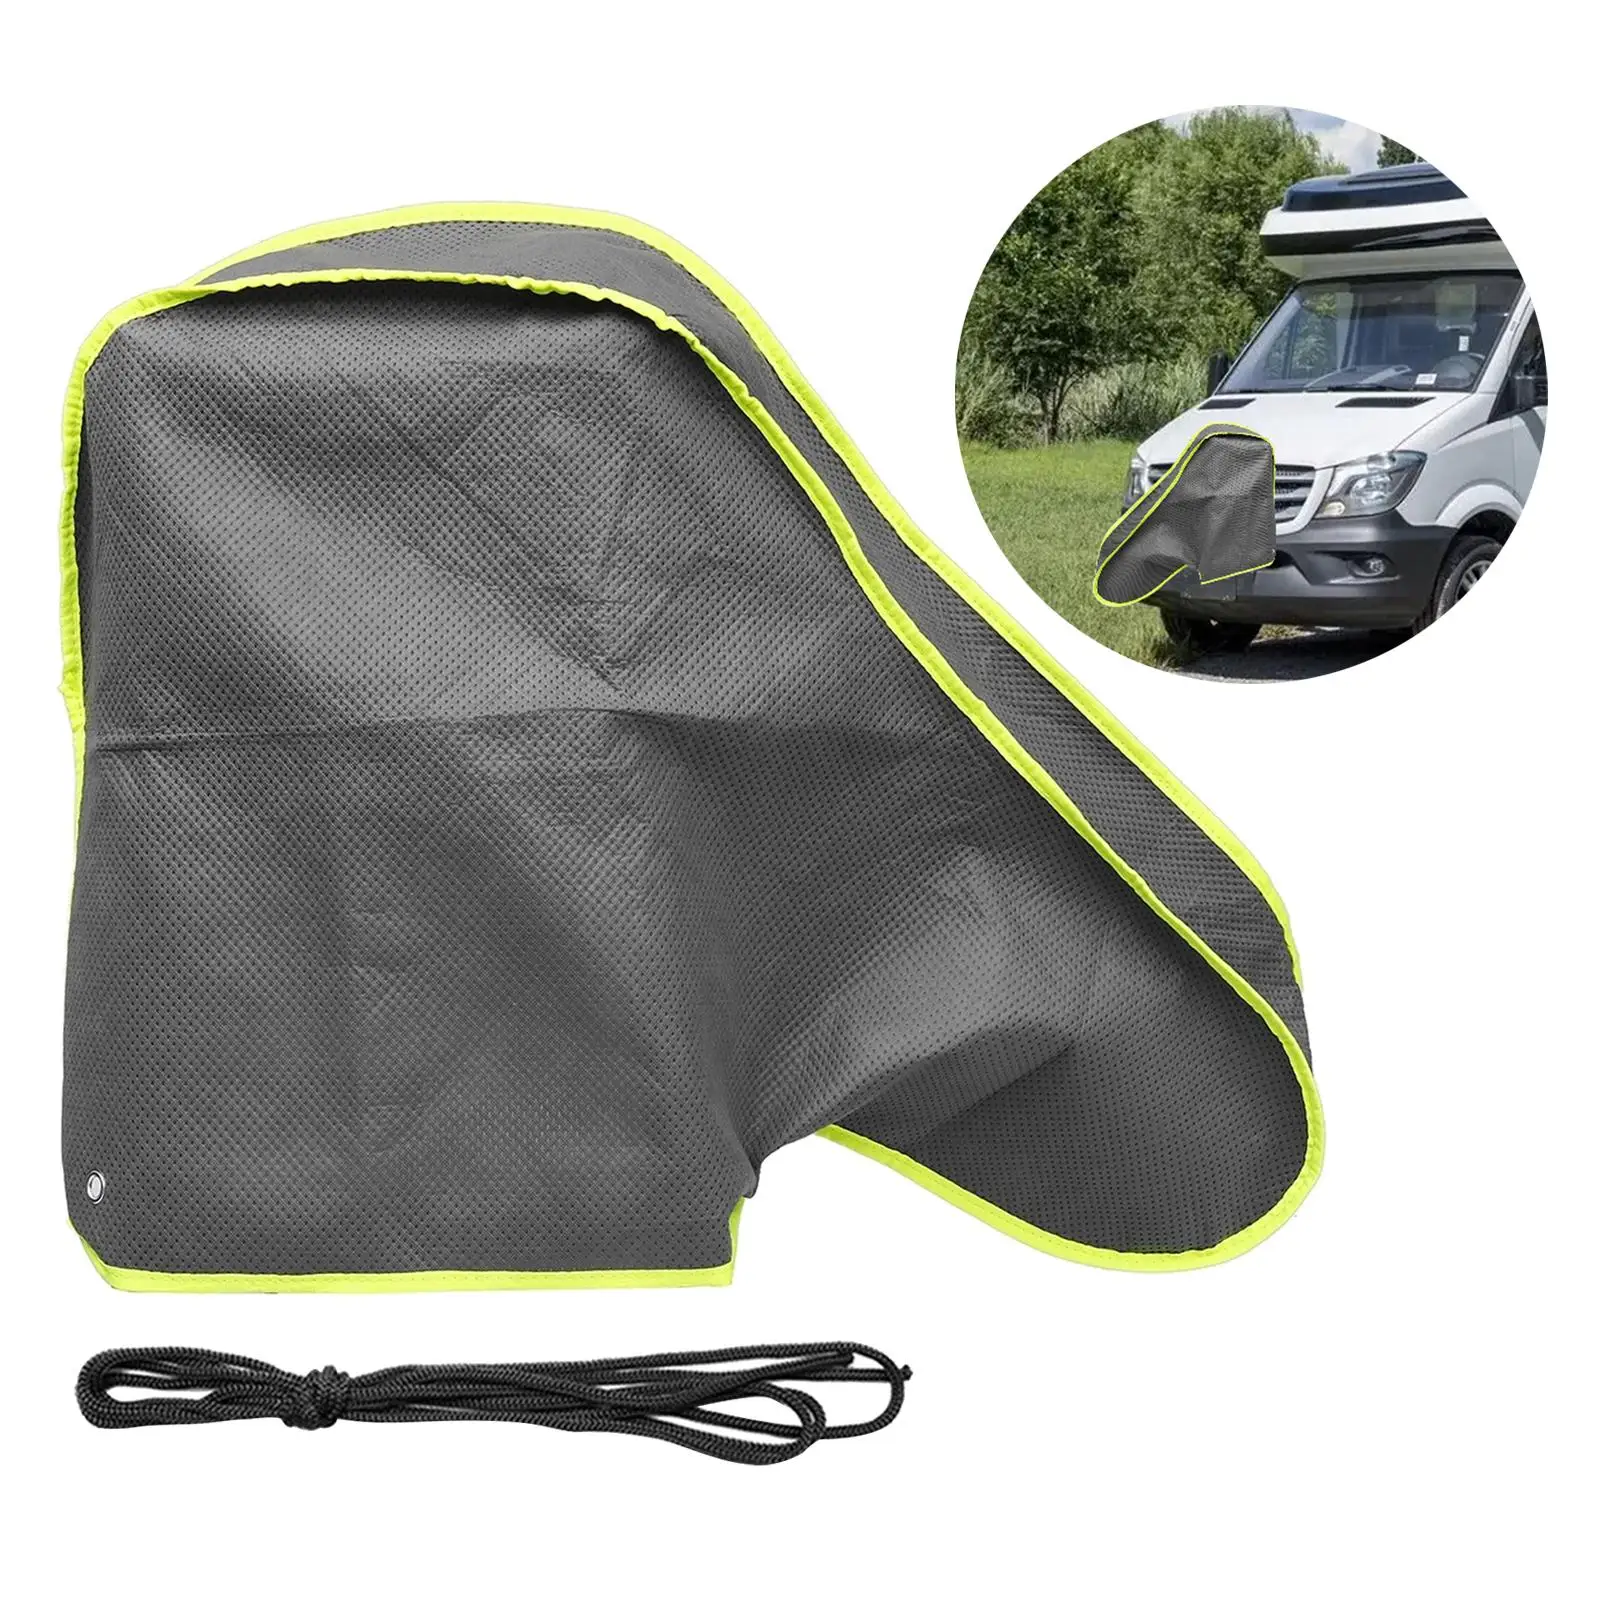 Caravan Hitch Cover Waterproof with Straps Towing for Trailer Campervan